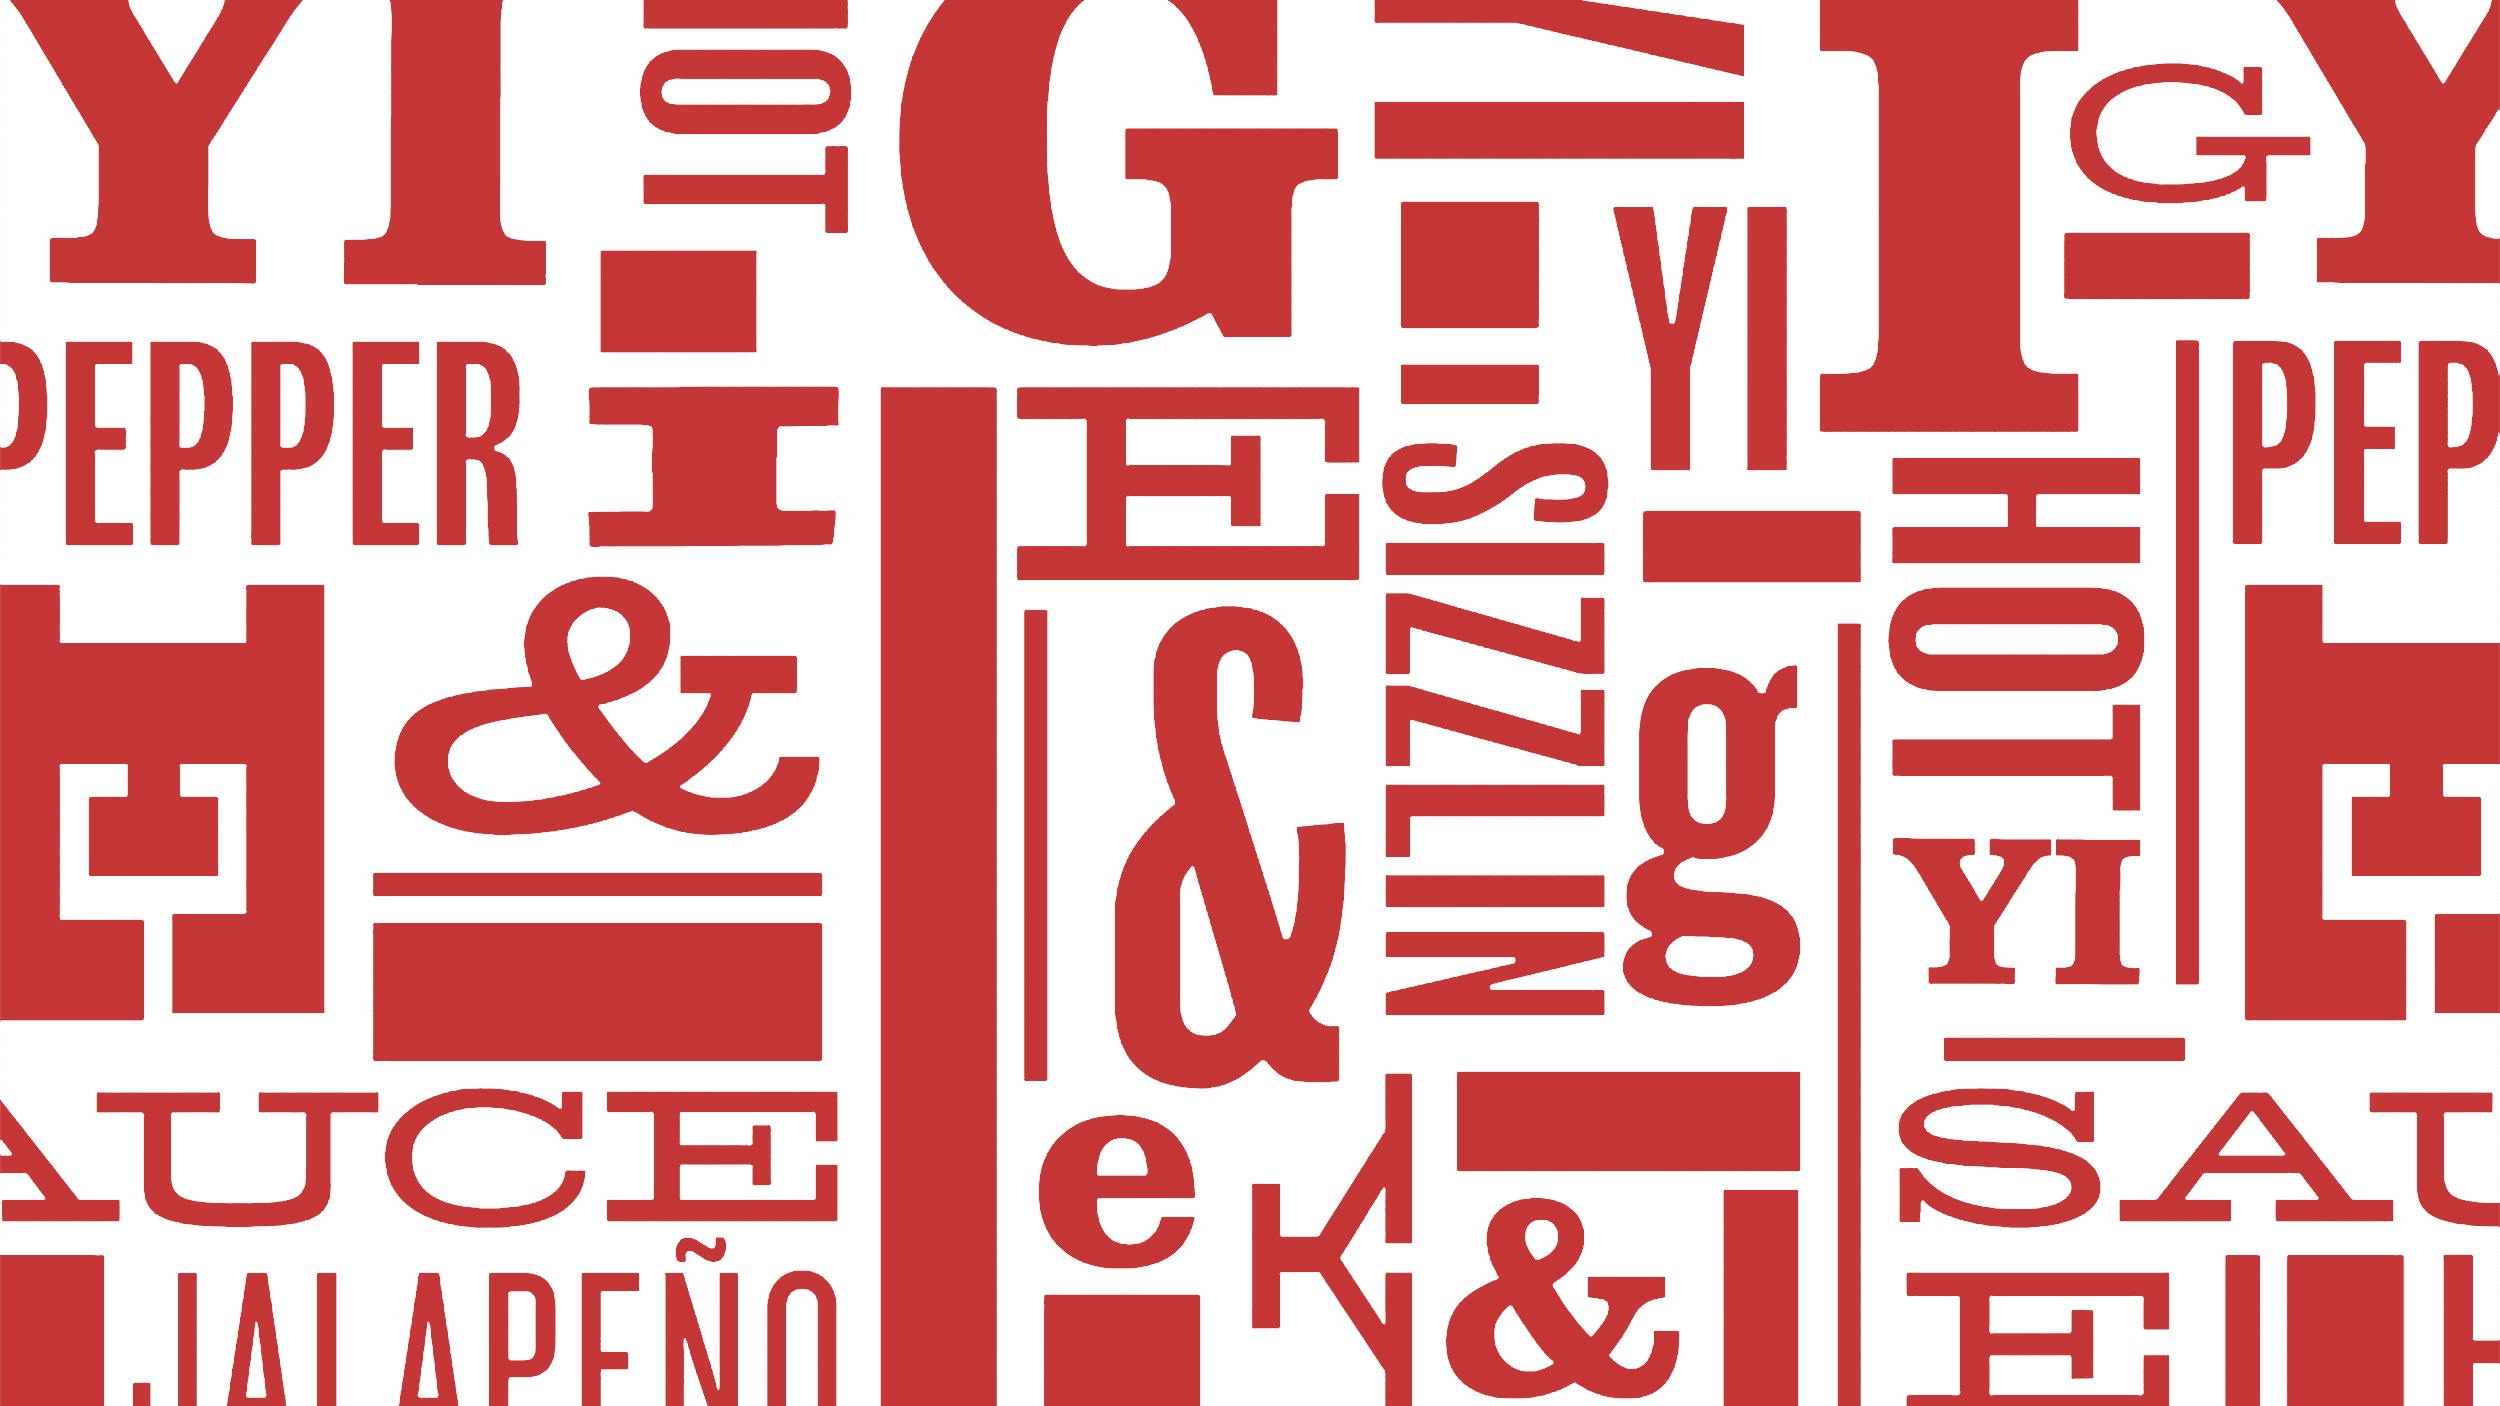 Shrink wrap typography lockup design featuring multiple typefaces and letters and different sizes in red for The Egg & I Yi-Yi hot sauce